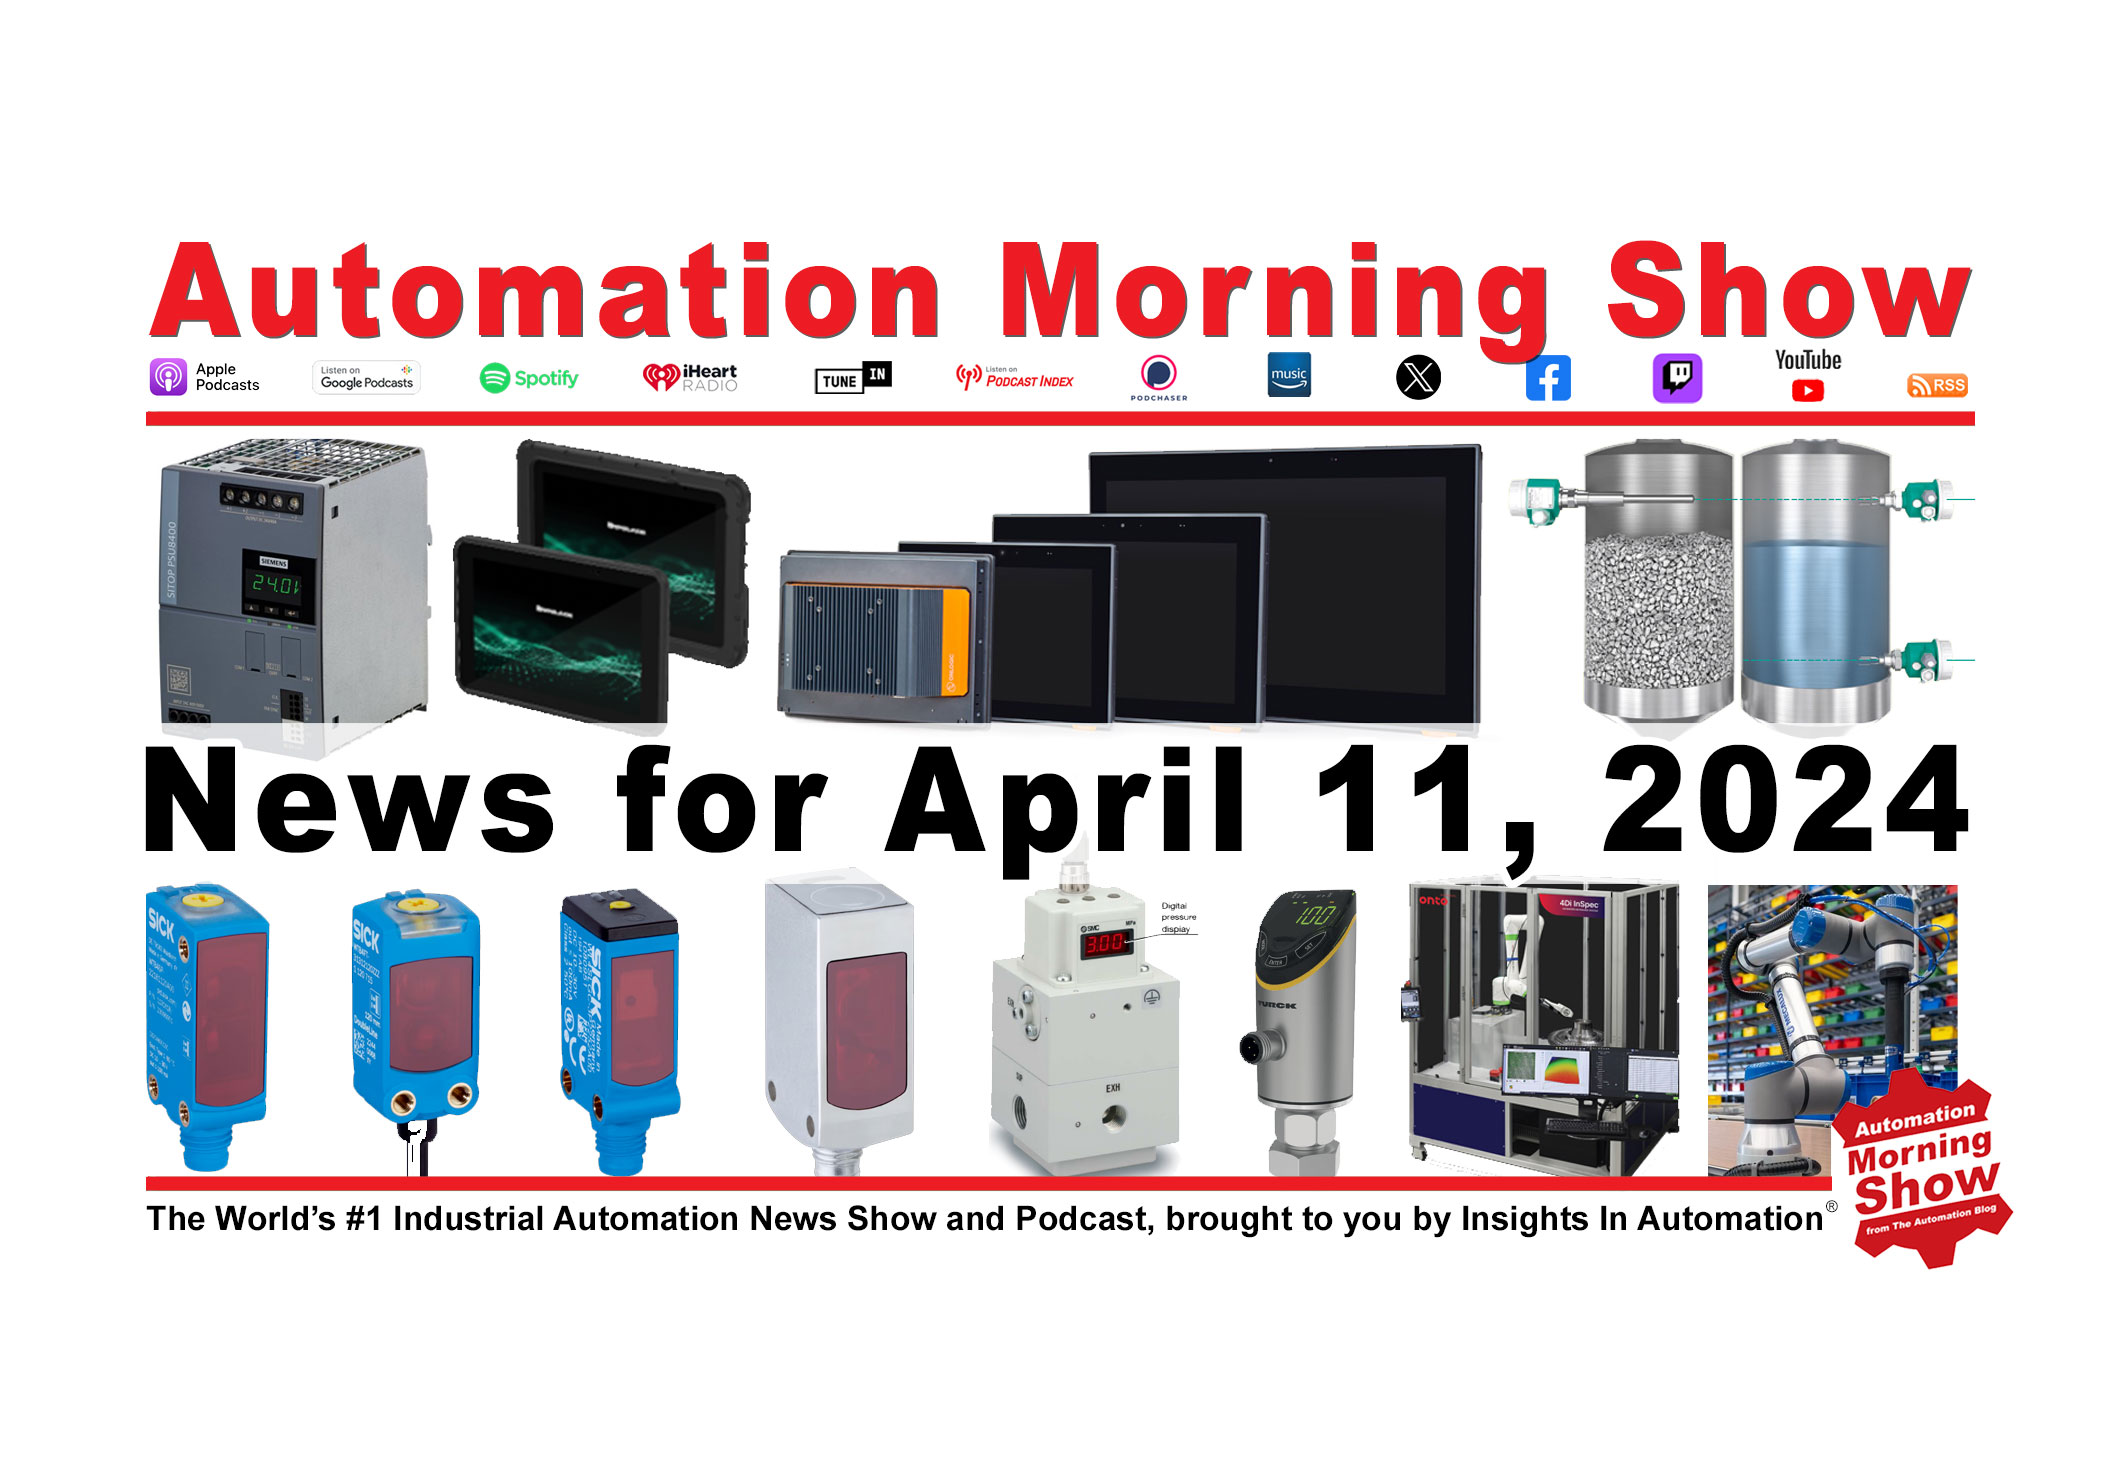 Automation Morning Show for April 11, 2024 (N172)